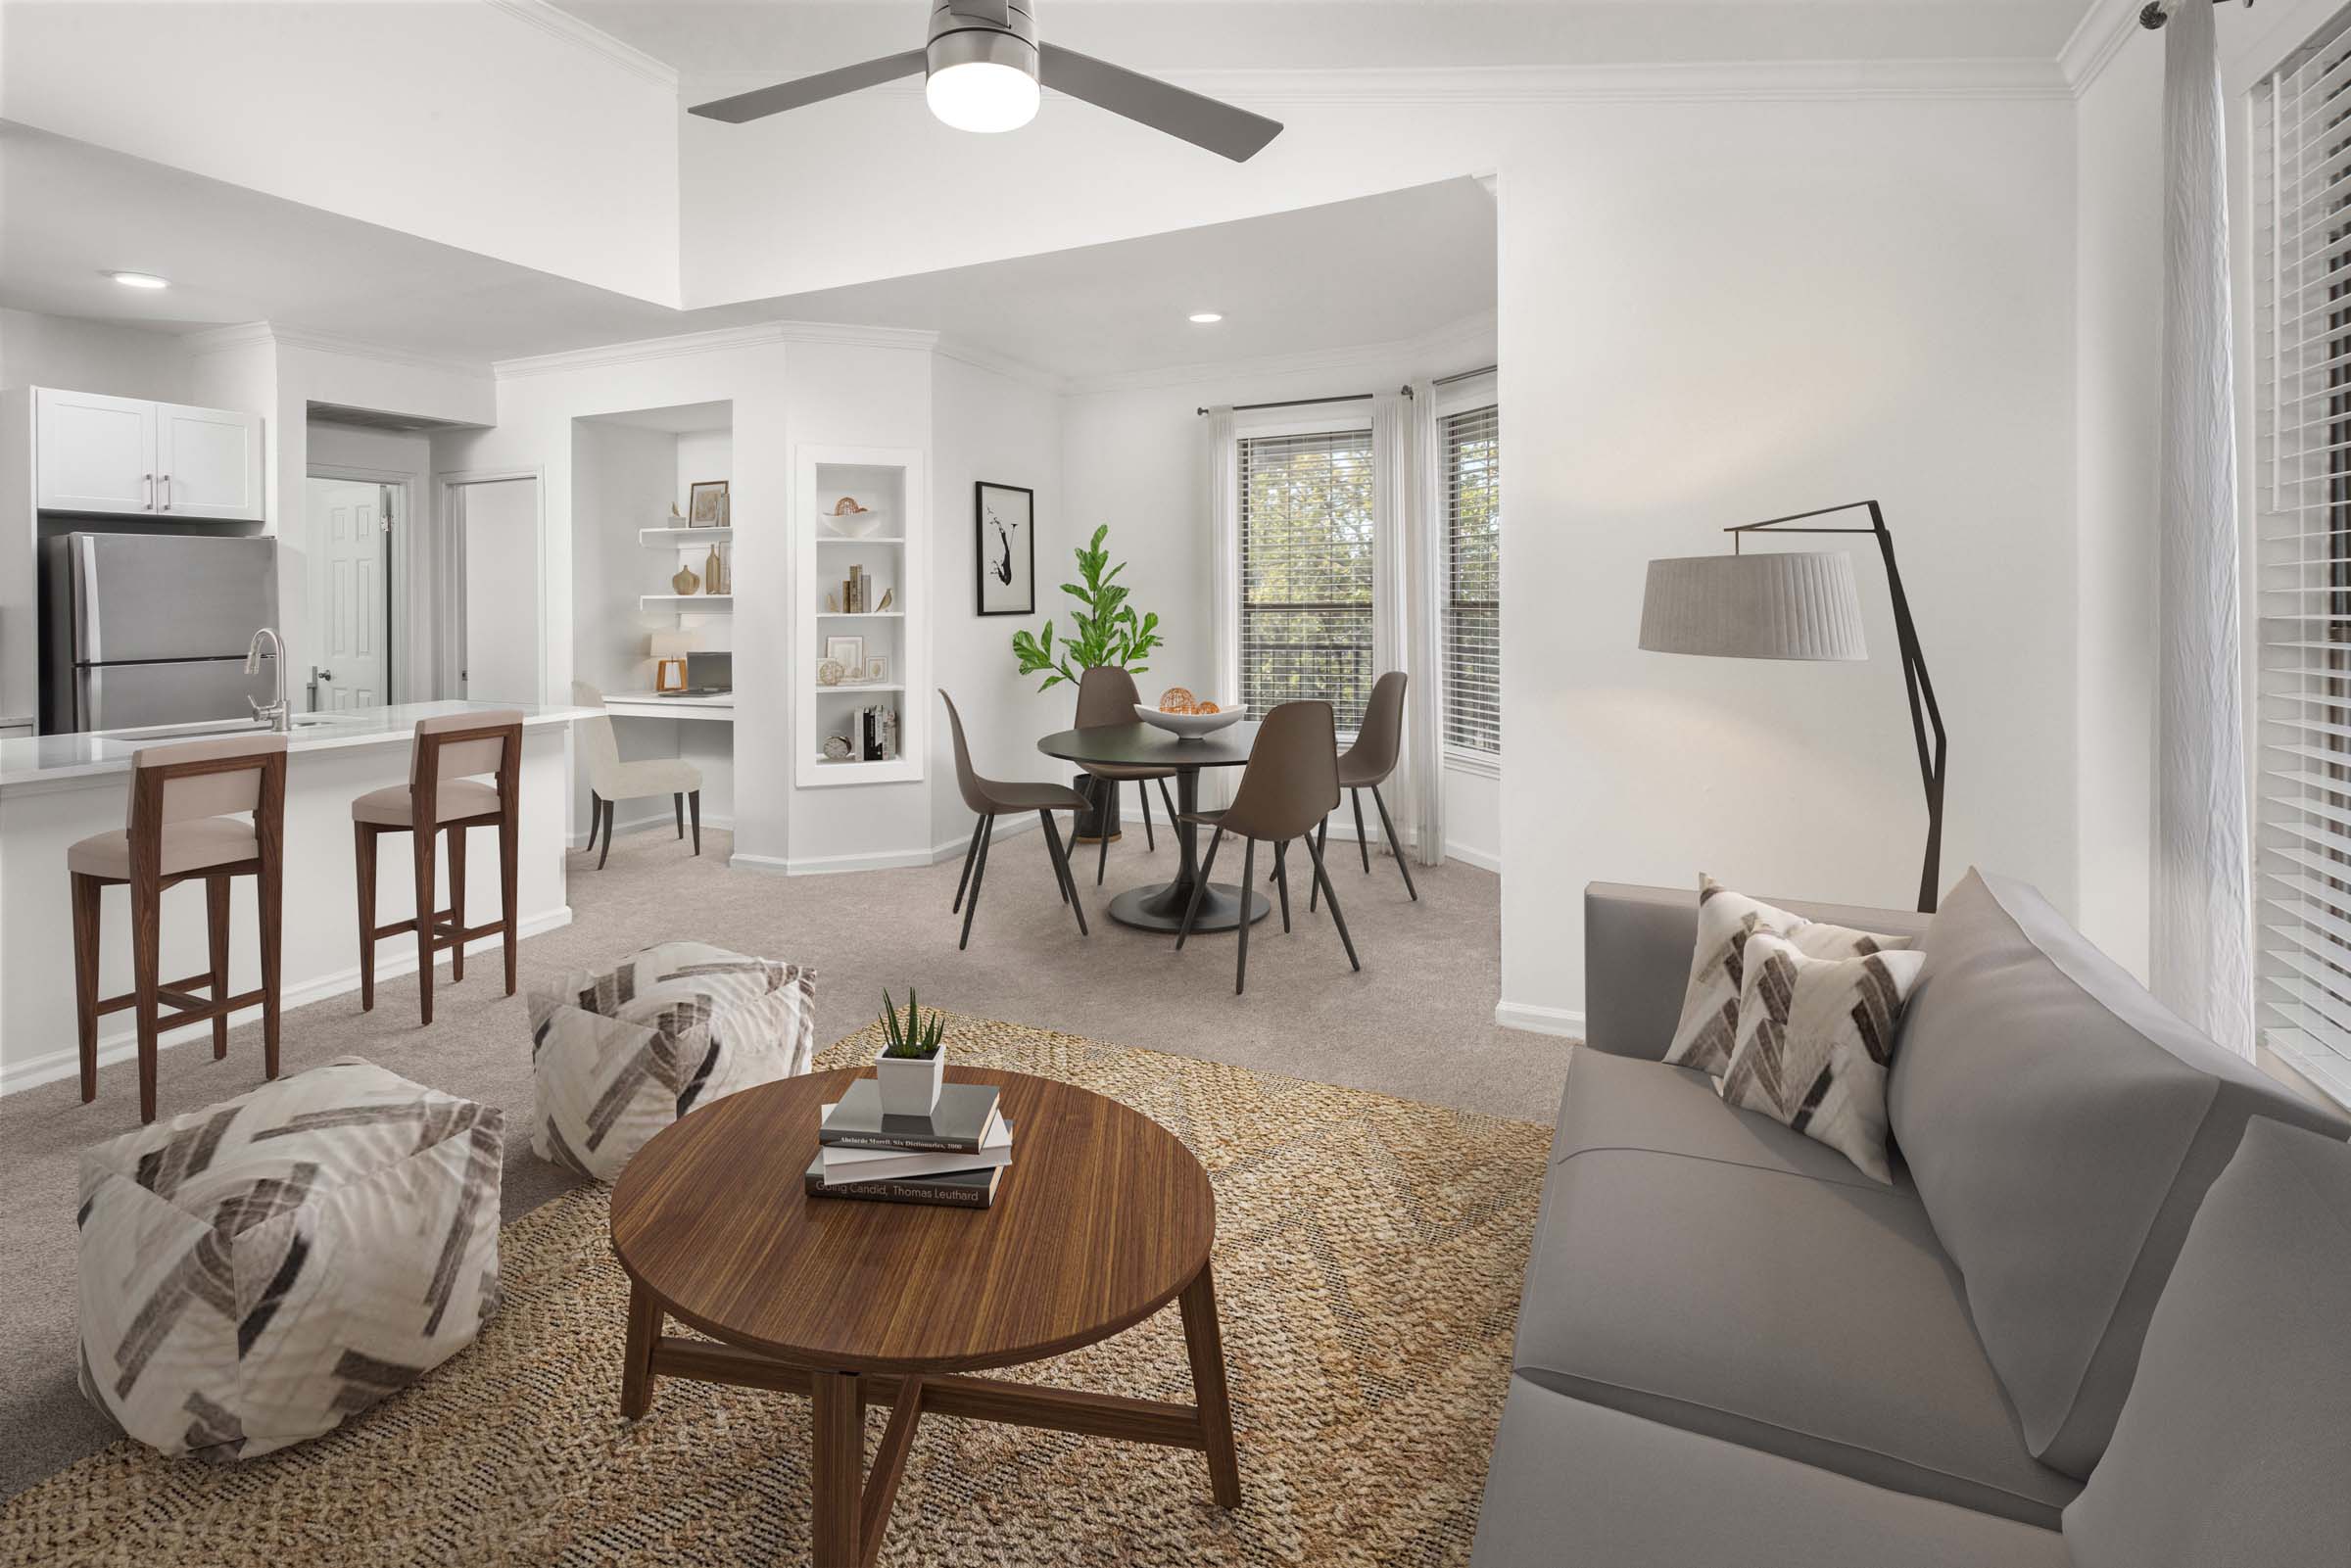 Living room, dining room and kitchen with extended ceiling and plush carpet at Camden Stoneleigh apartments in Austin, TX.